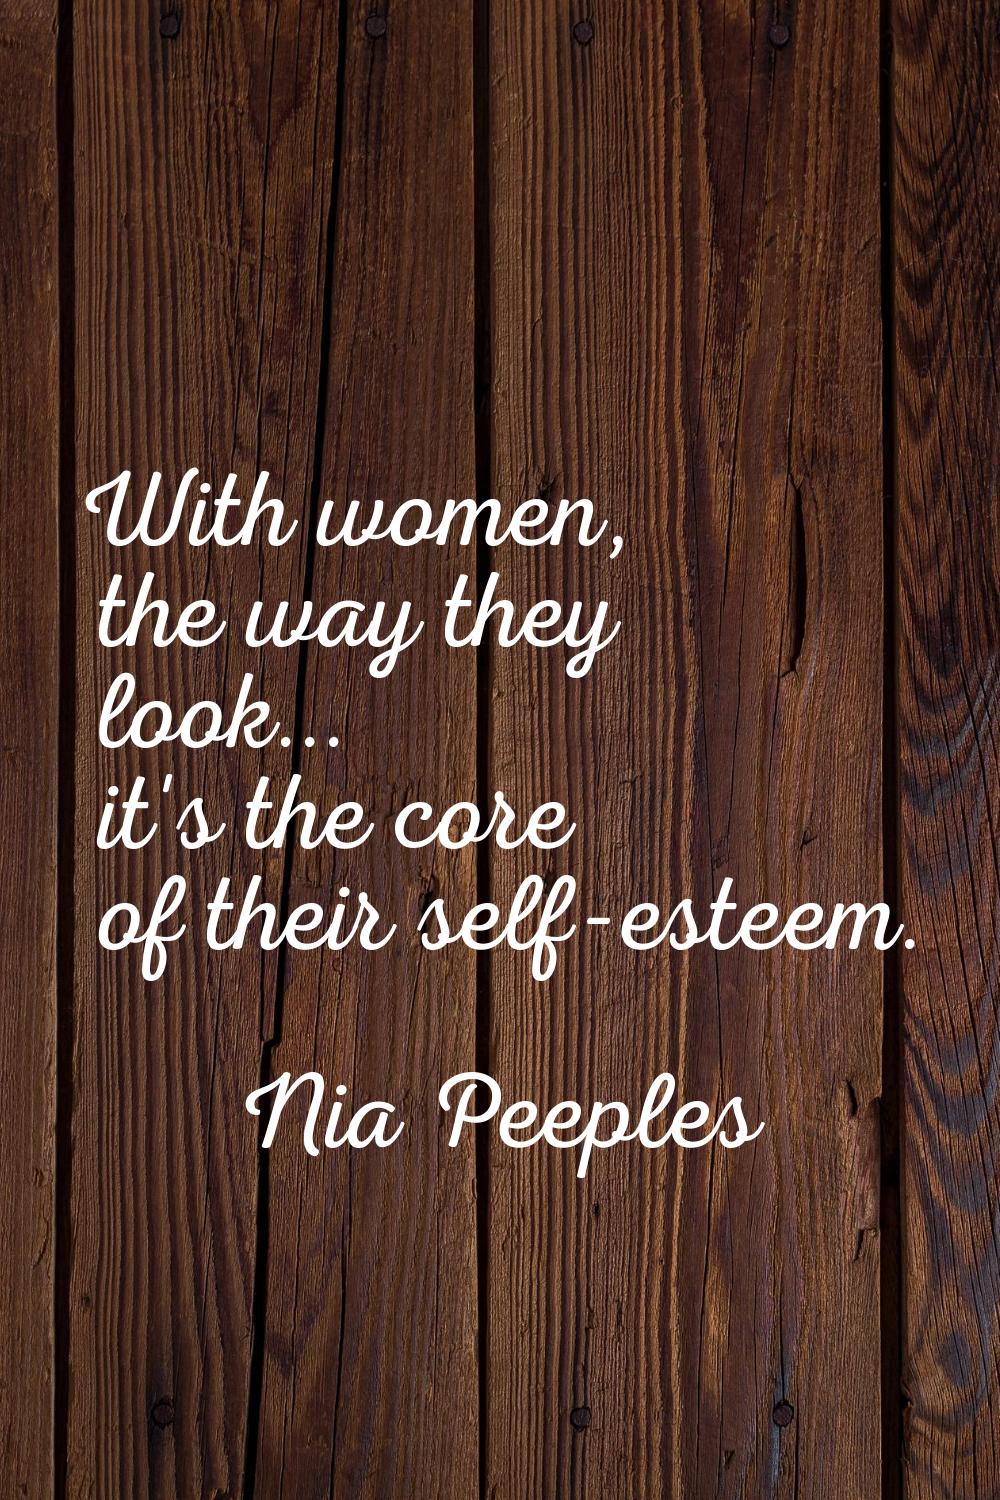 With women, the way they look... it's the core of their self-esteem.